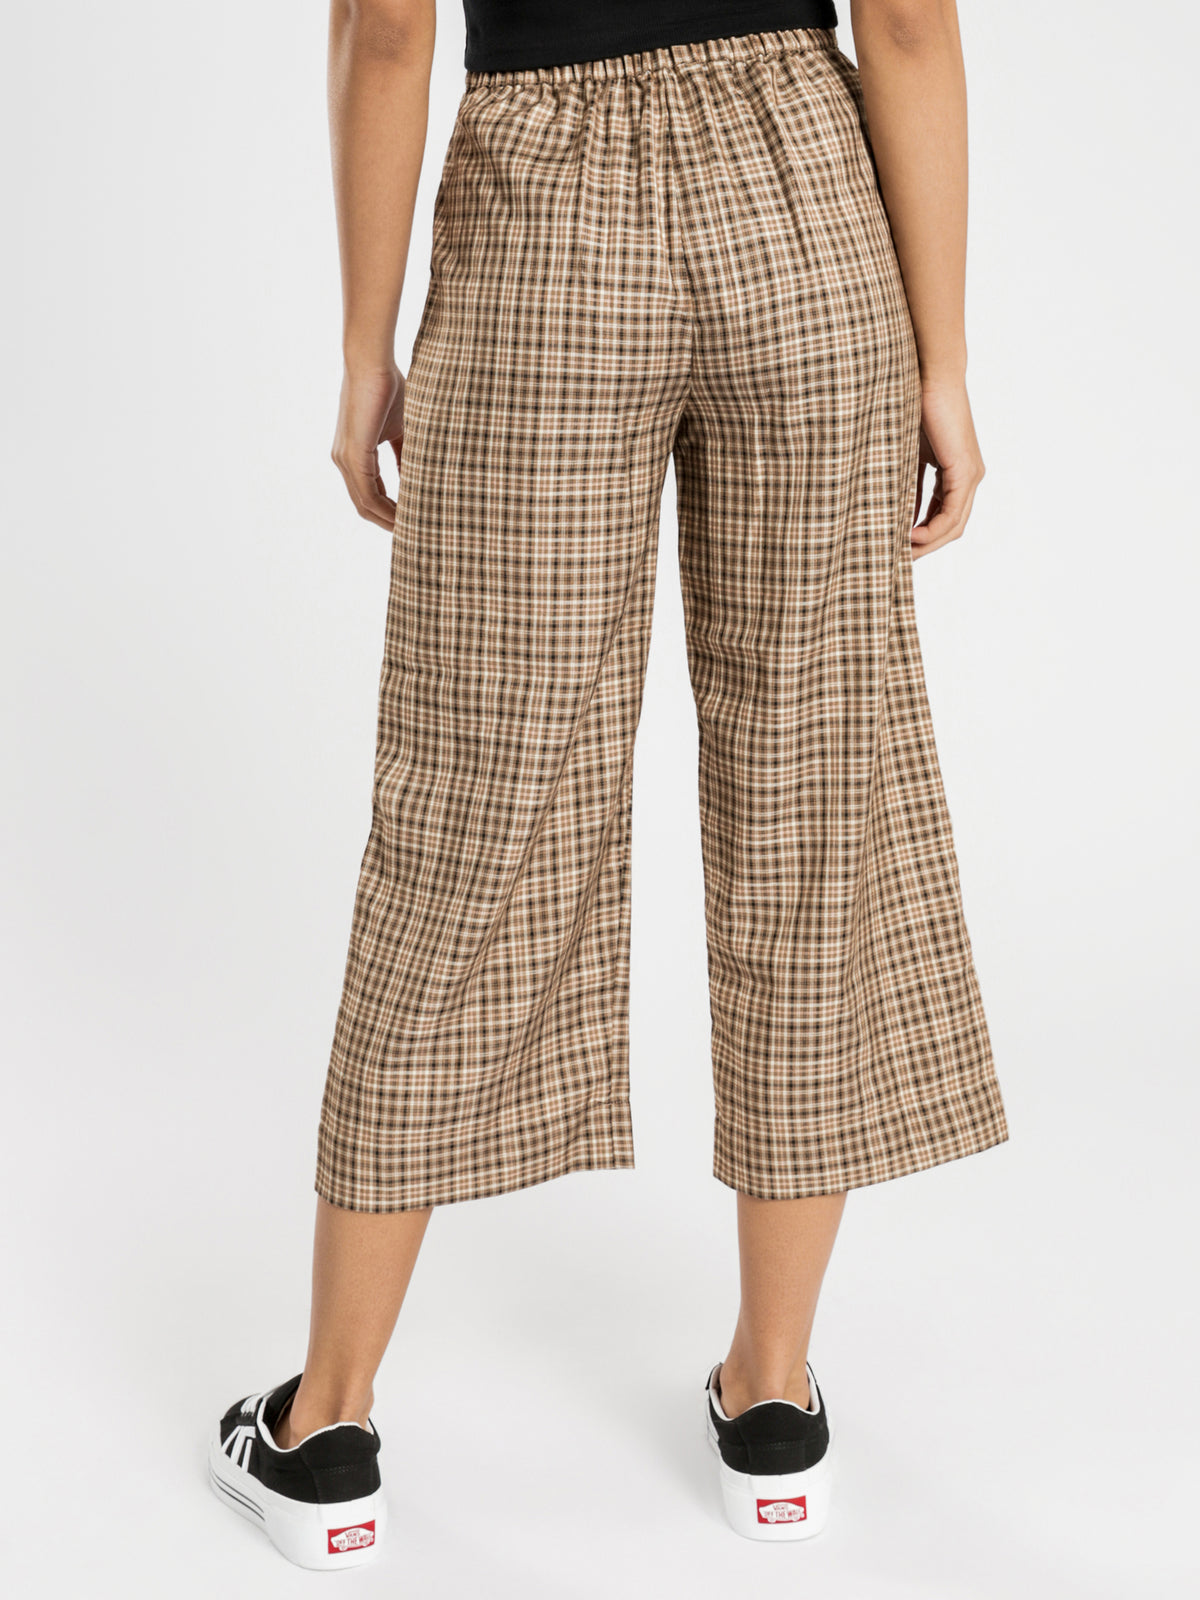 Darby Check Pants in Tan